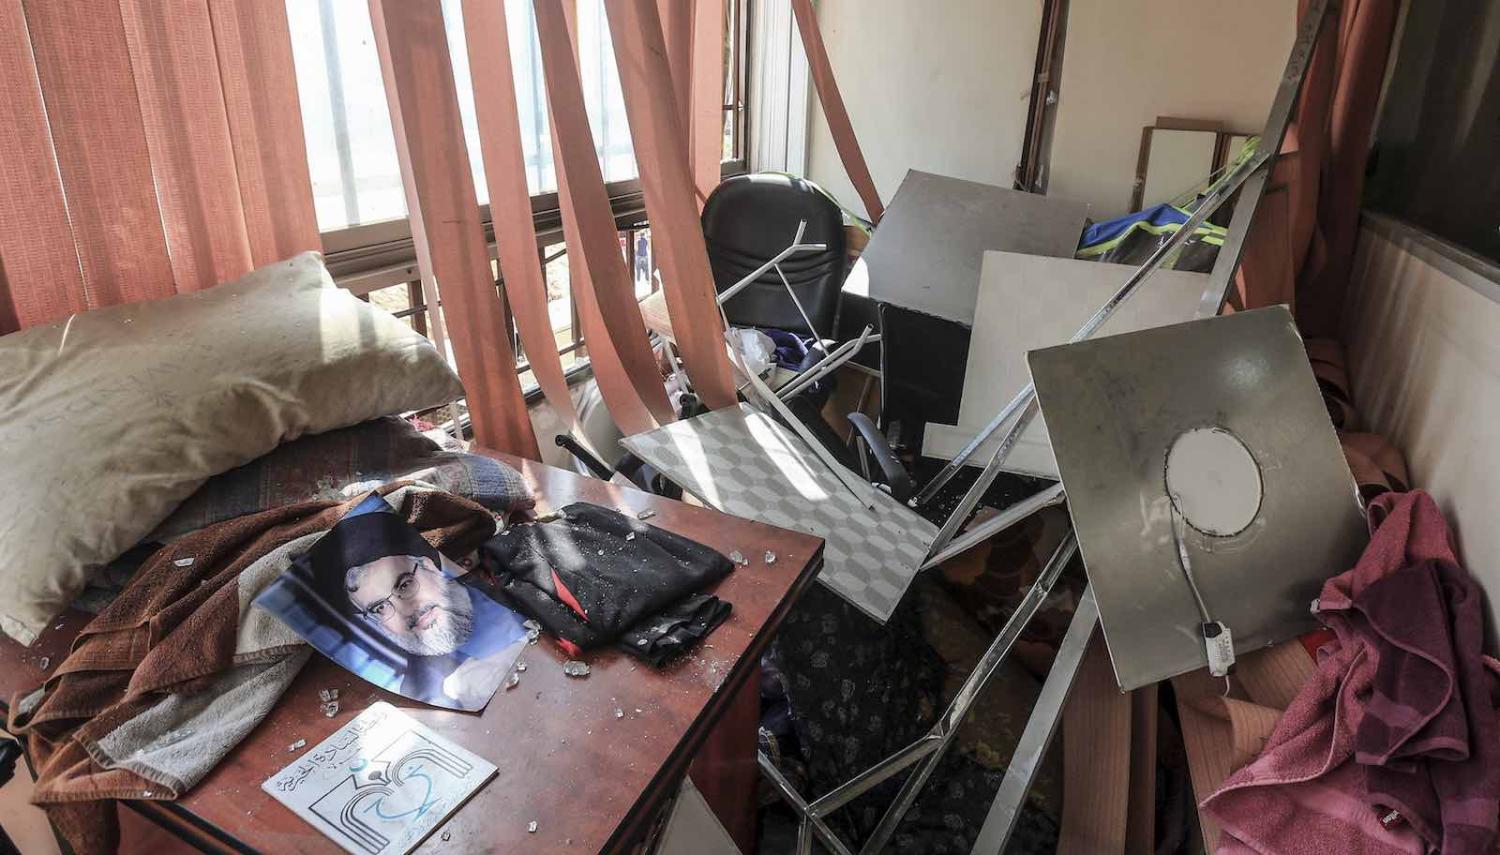 Damage inside a Hezbollah media office in Beirut, after an alleged Israeli drone exploded near the building, 25 August 2019 (Photo: STR/Picture Alliance via Getty Images)